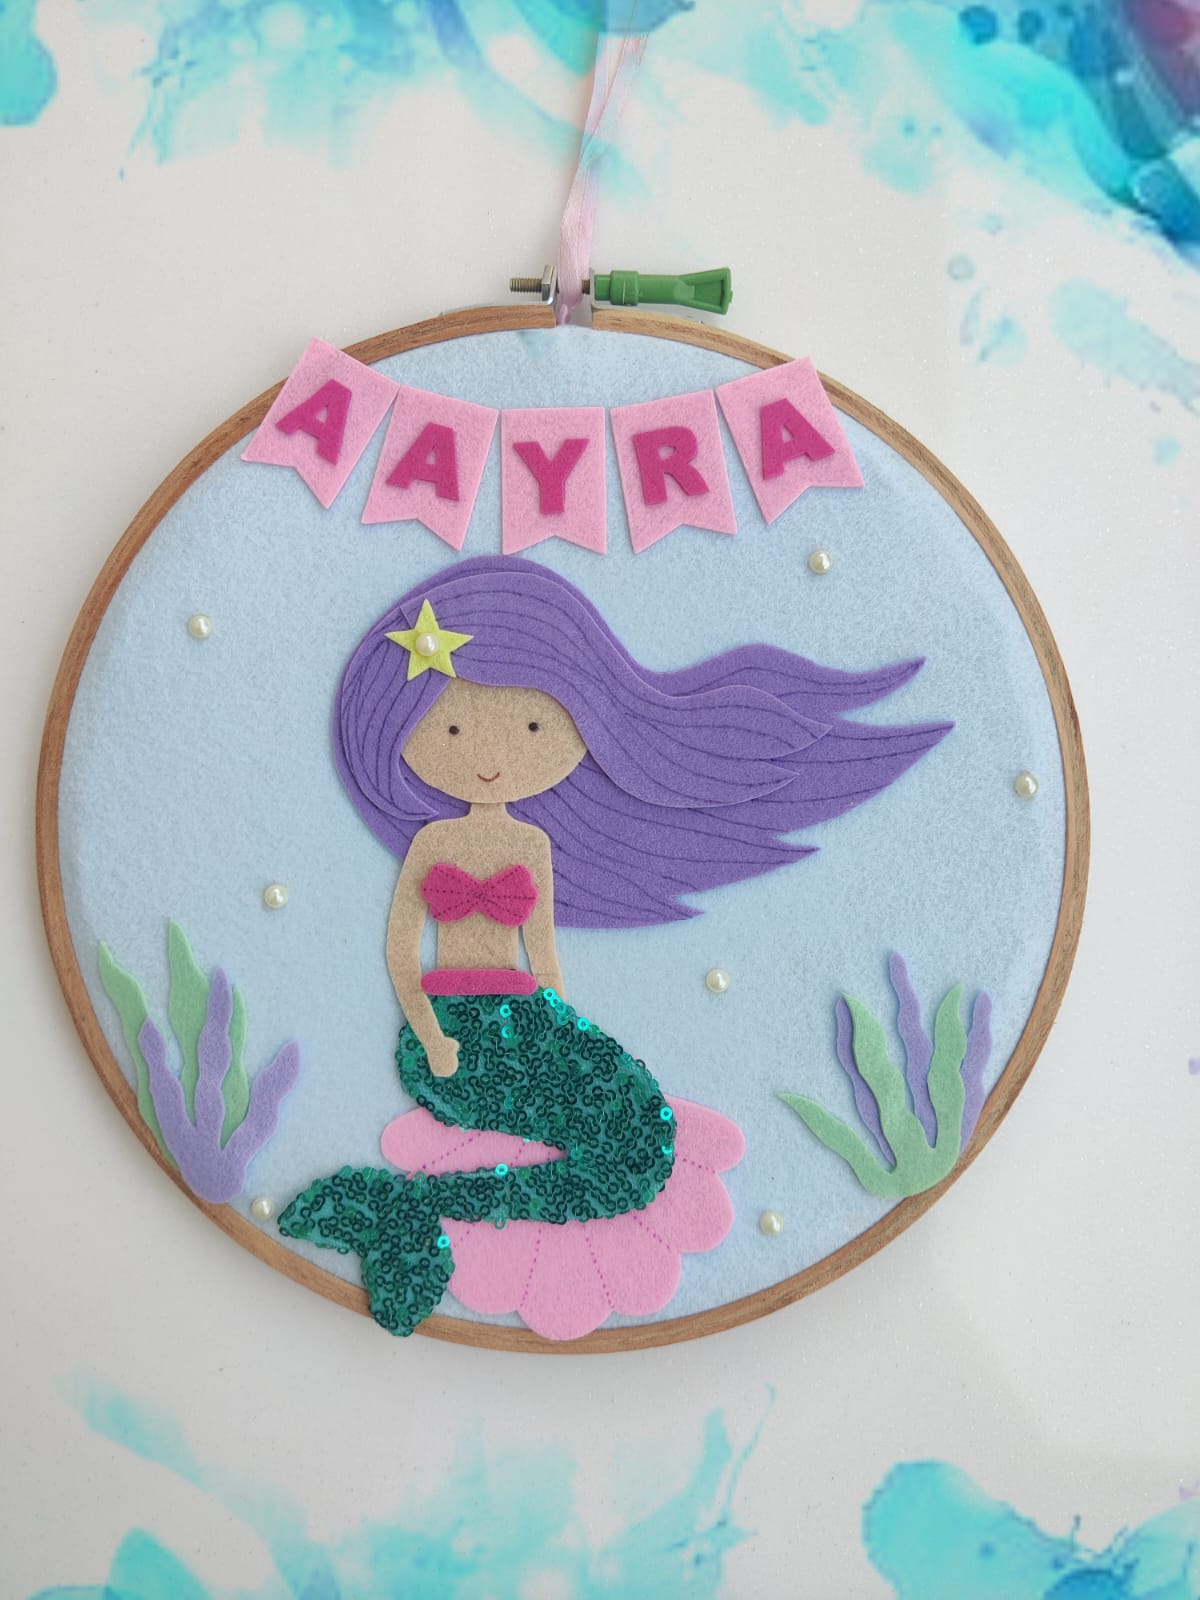 Hand-Crafted Embroidery Hoop Wall Hanging Art for Home Decor - Mermaid (PREPAID ORDER)